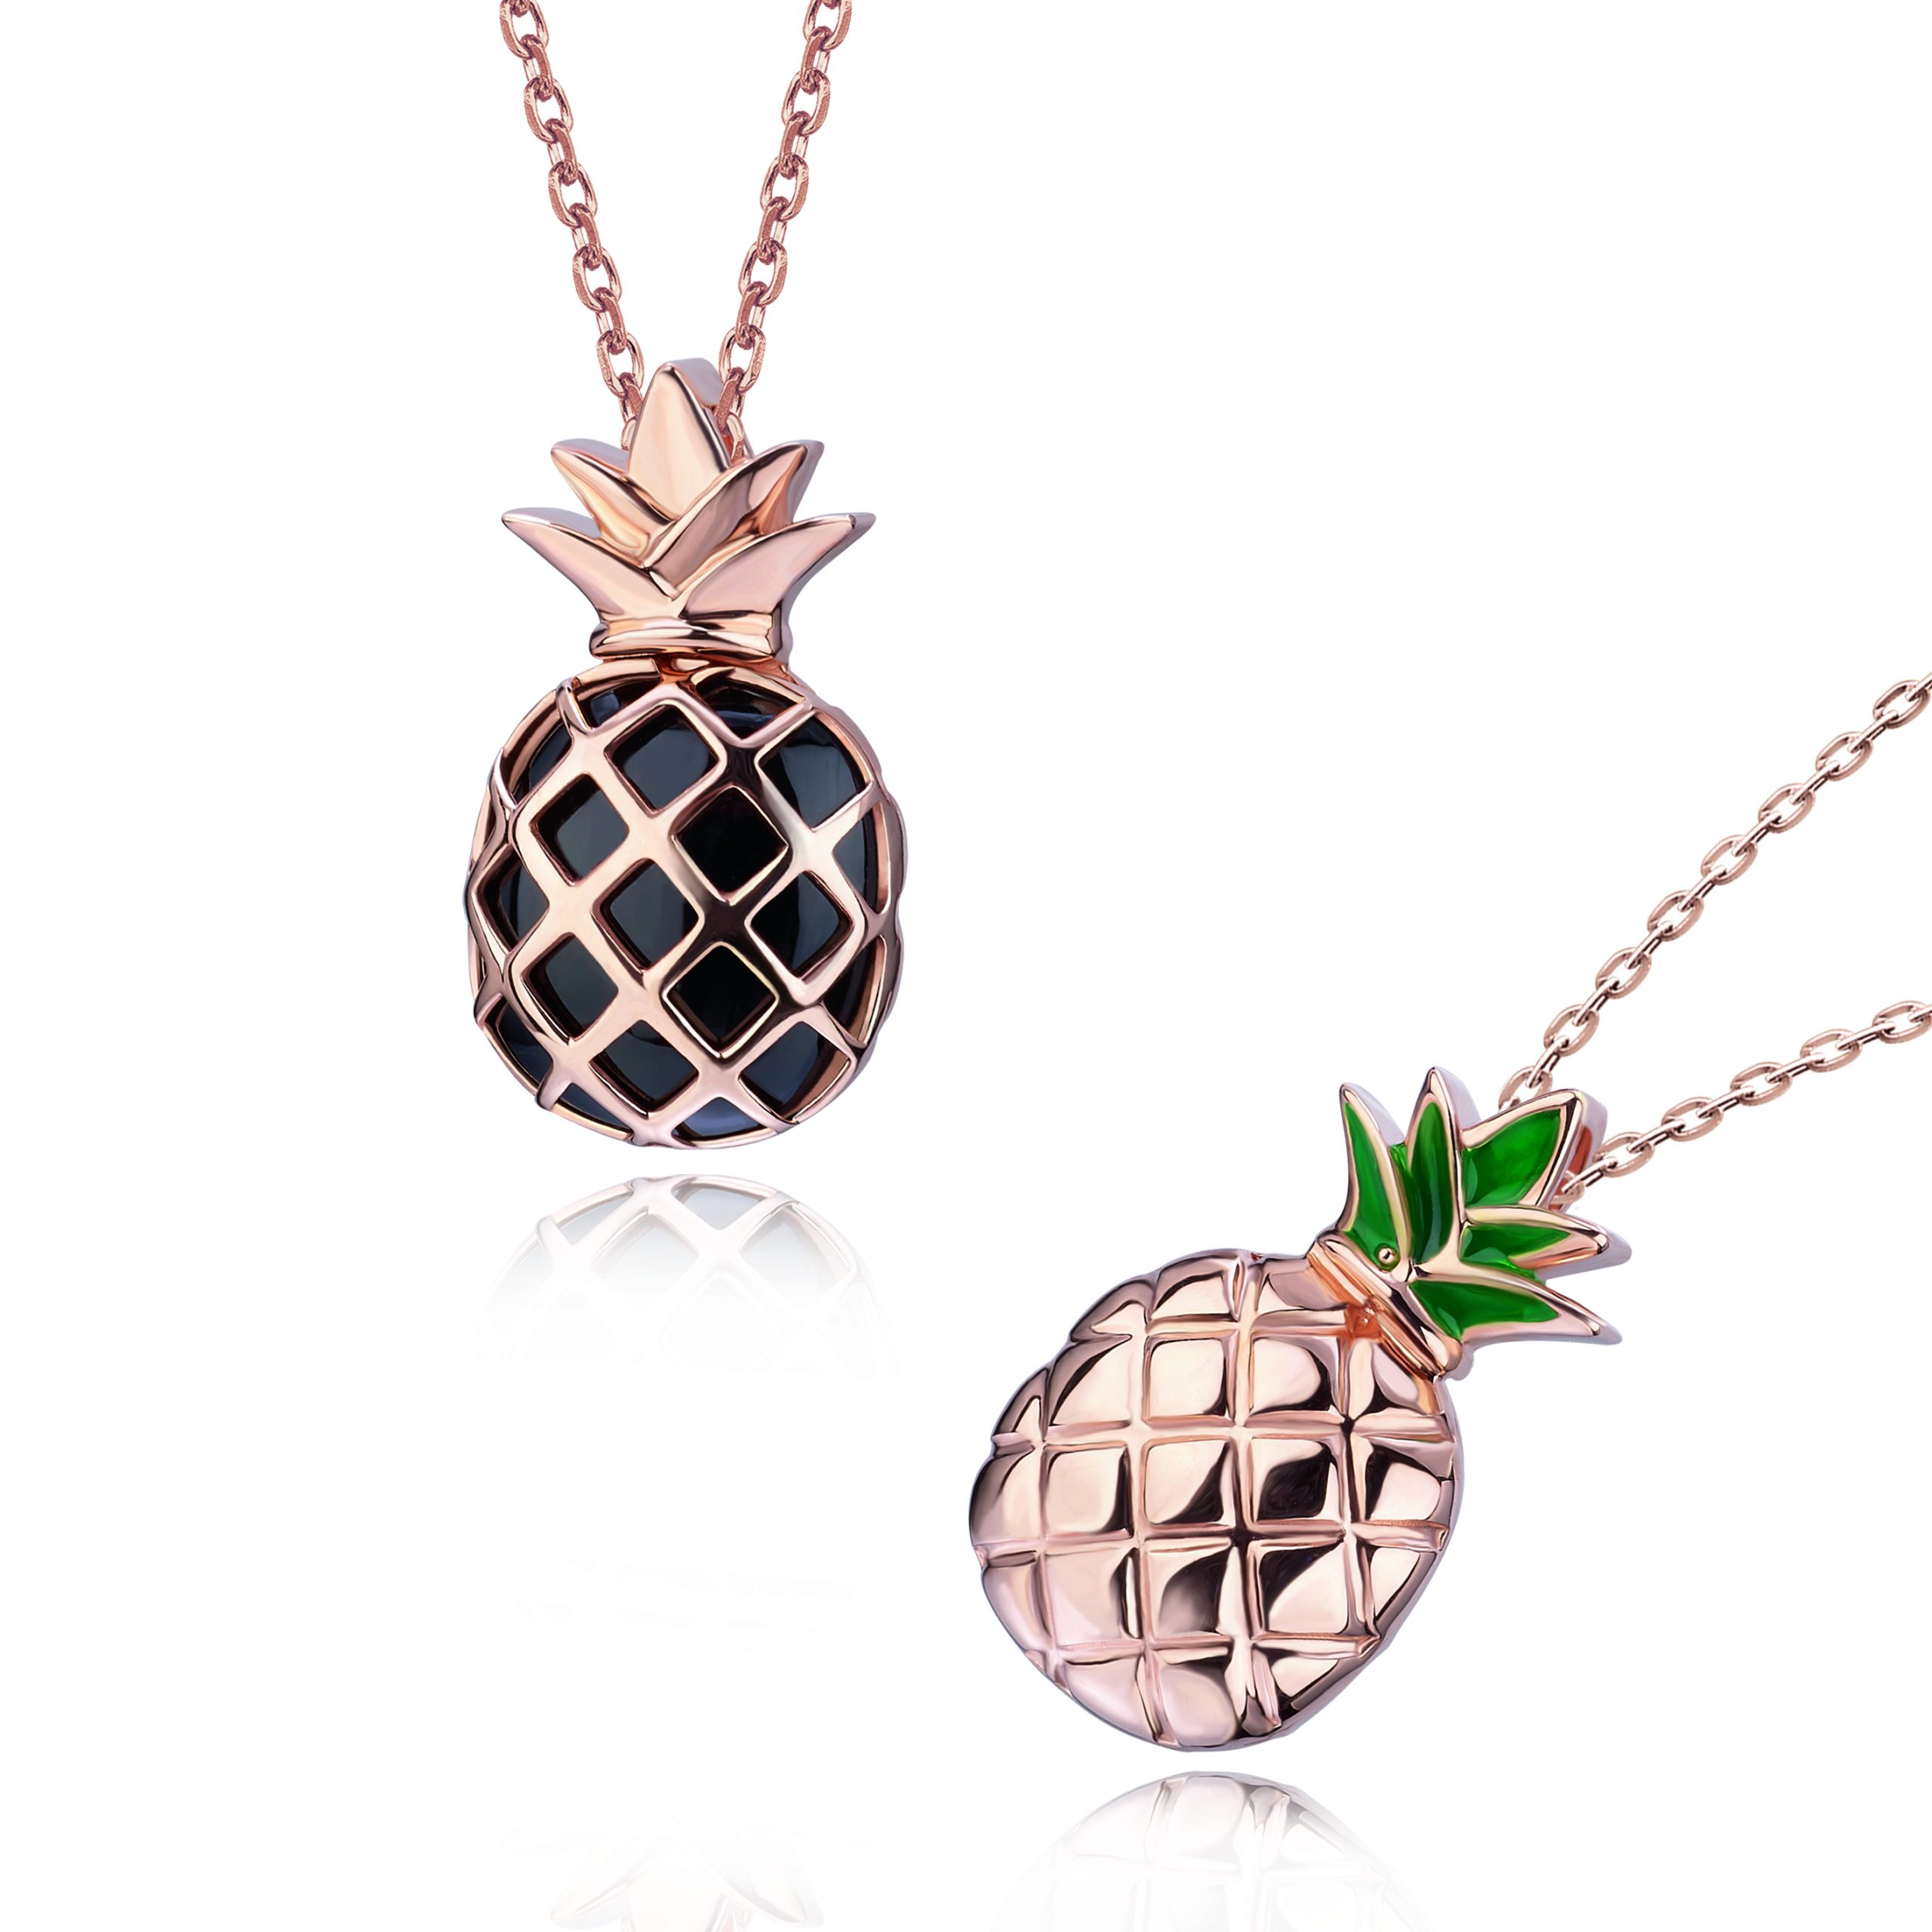 Hot items “Black Pineapple” 18K Gold Necklace